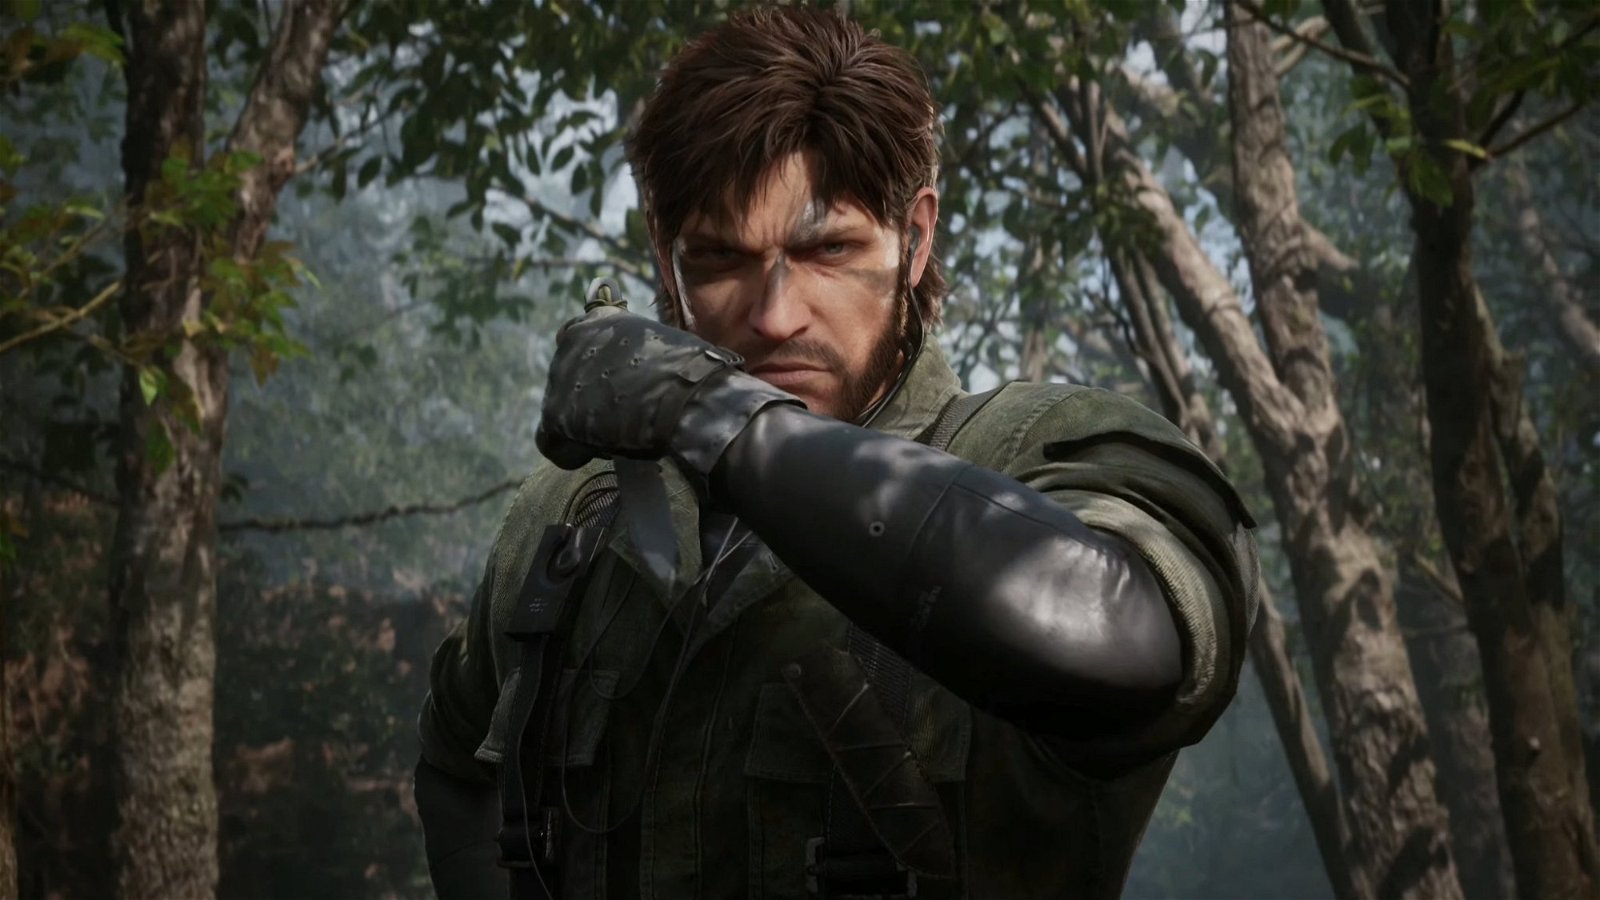 Metal Gear Solid Delta shows filters, splash screen and more